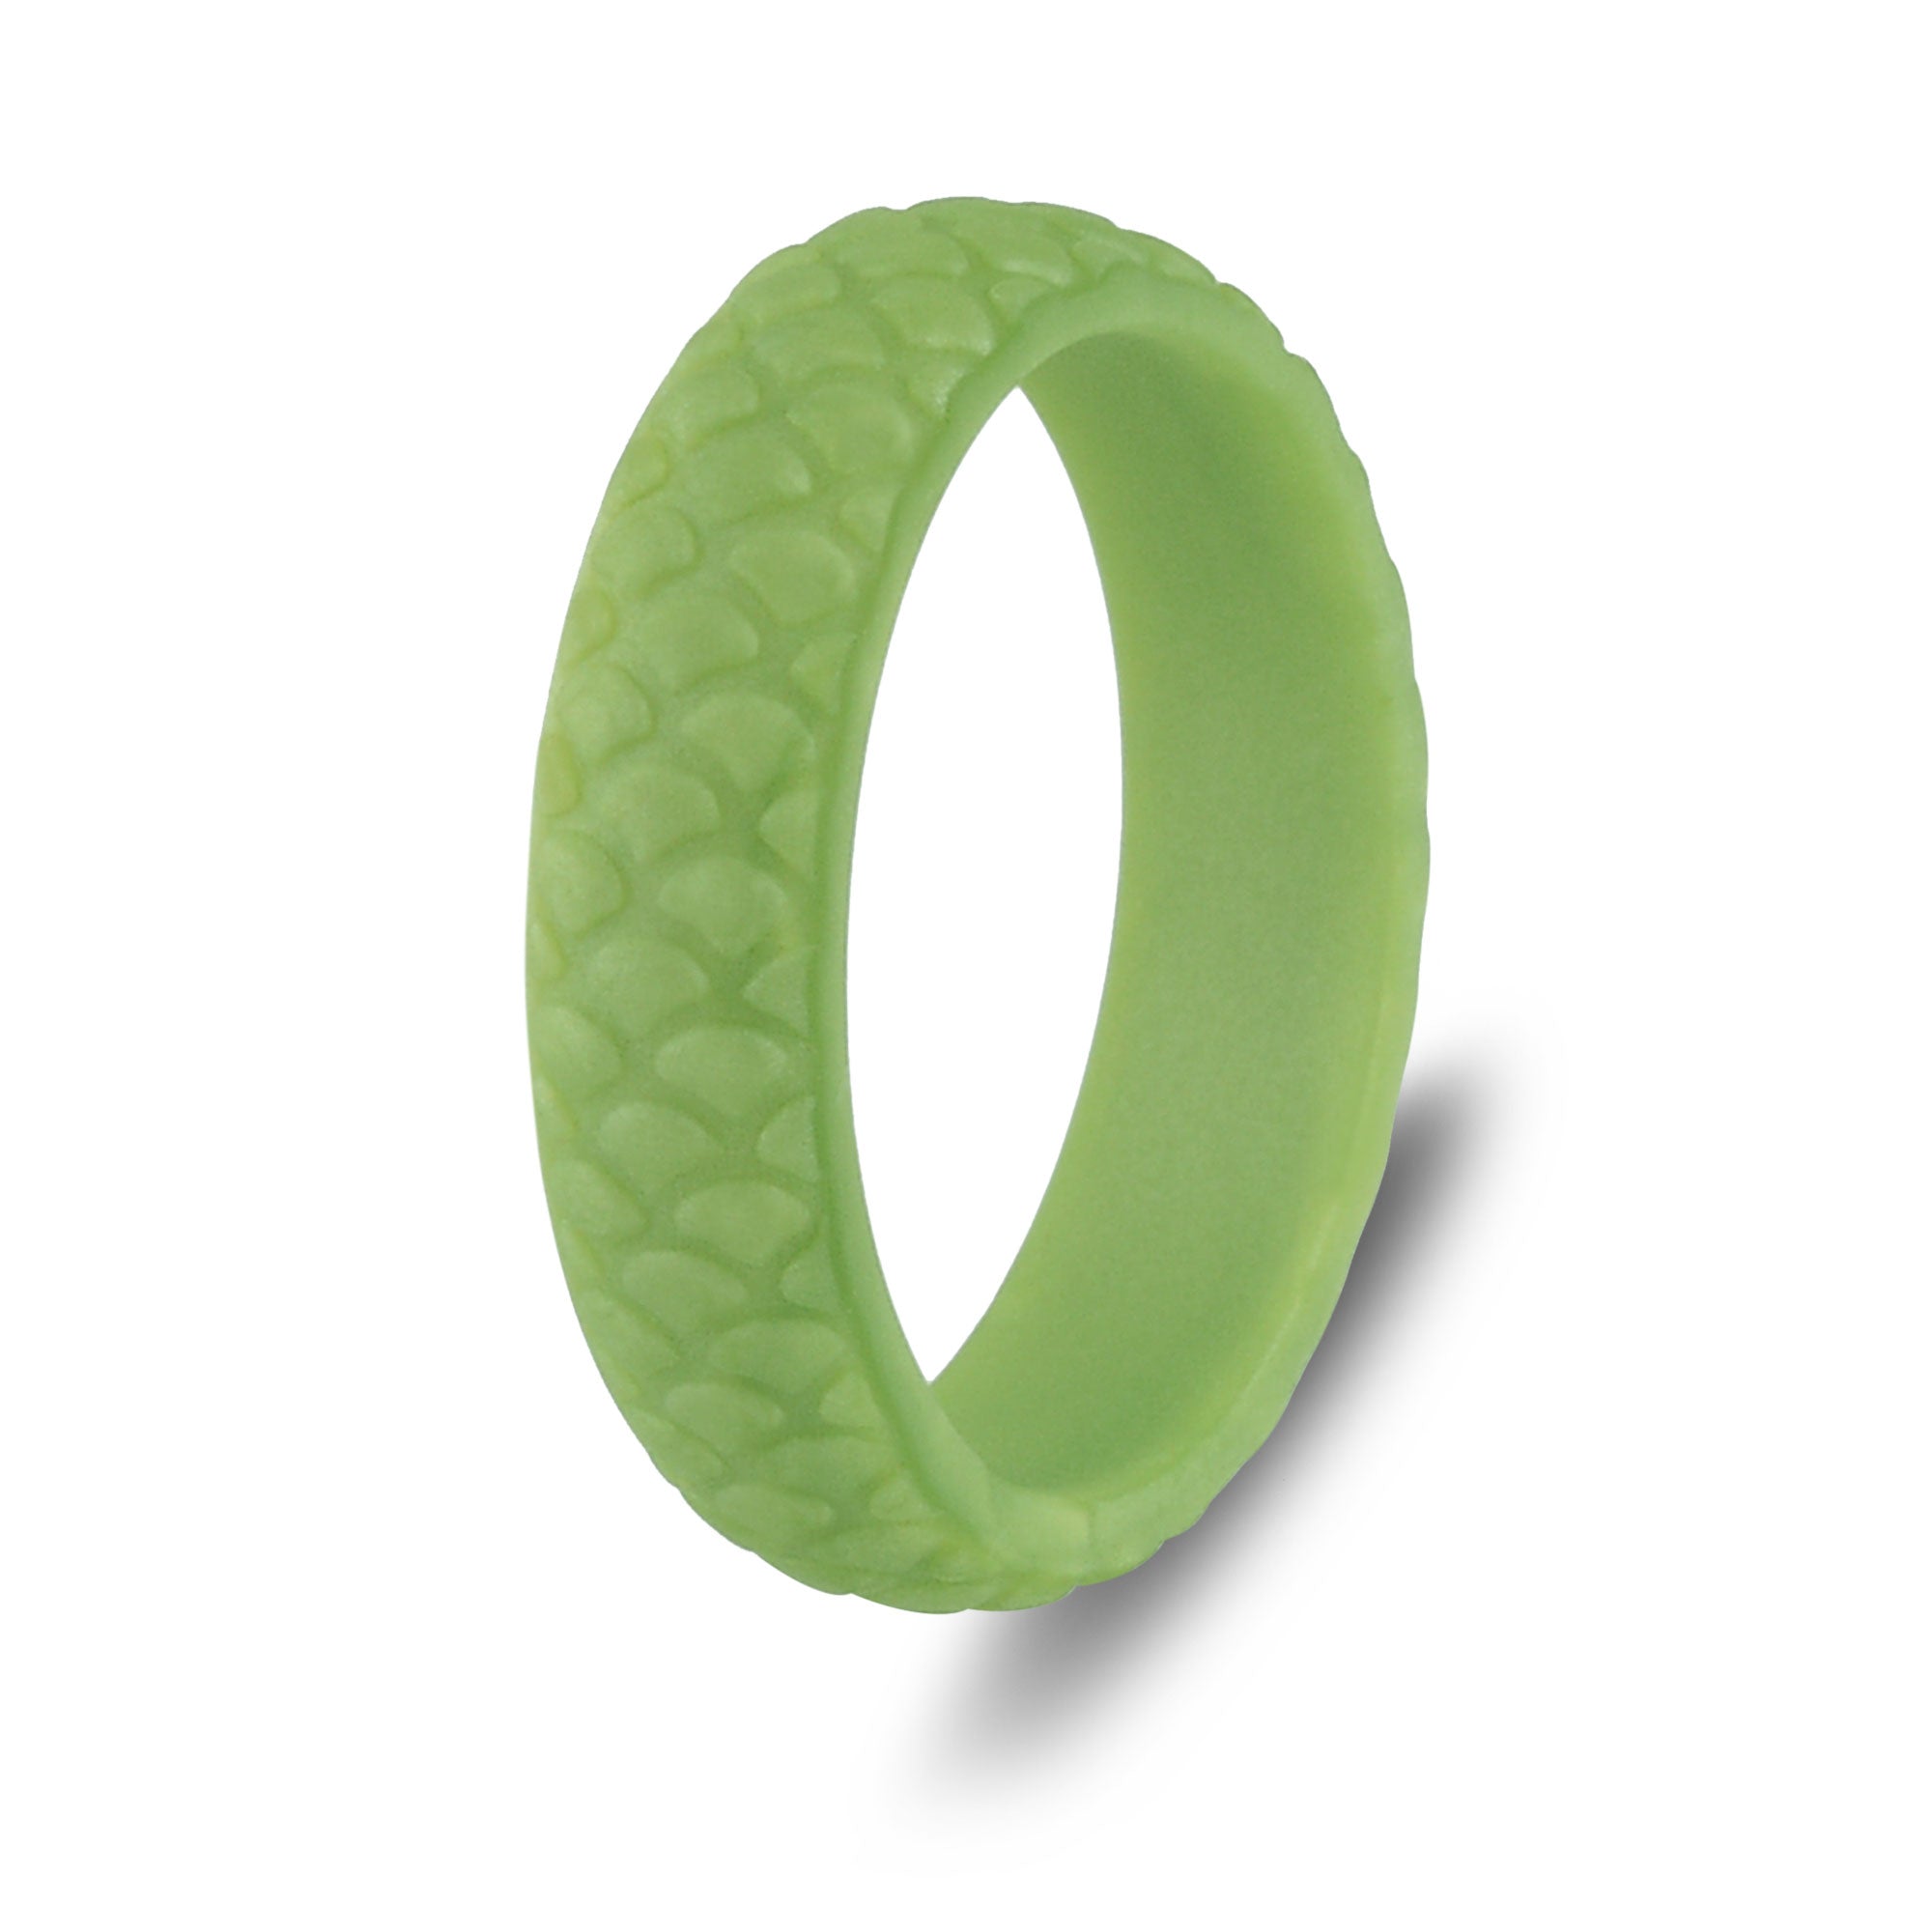 The Seashell Shores - Silicone Ring